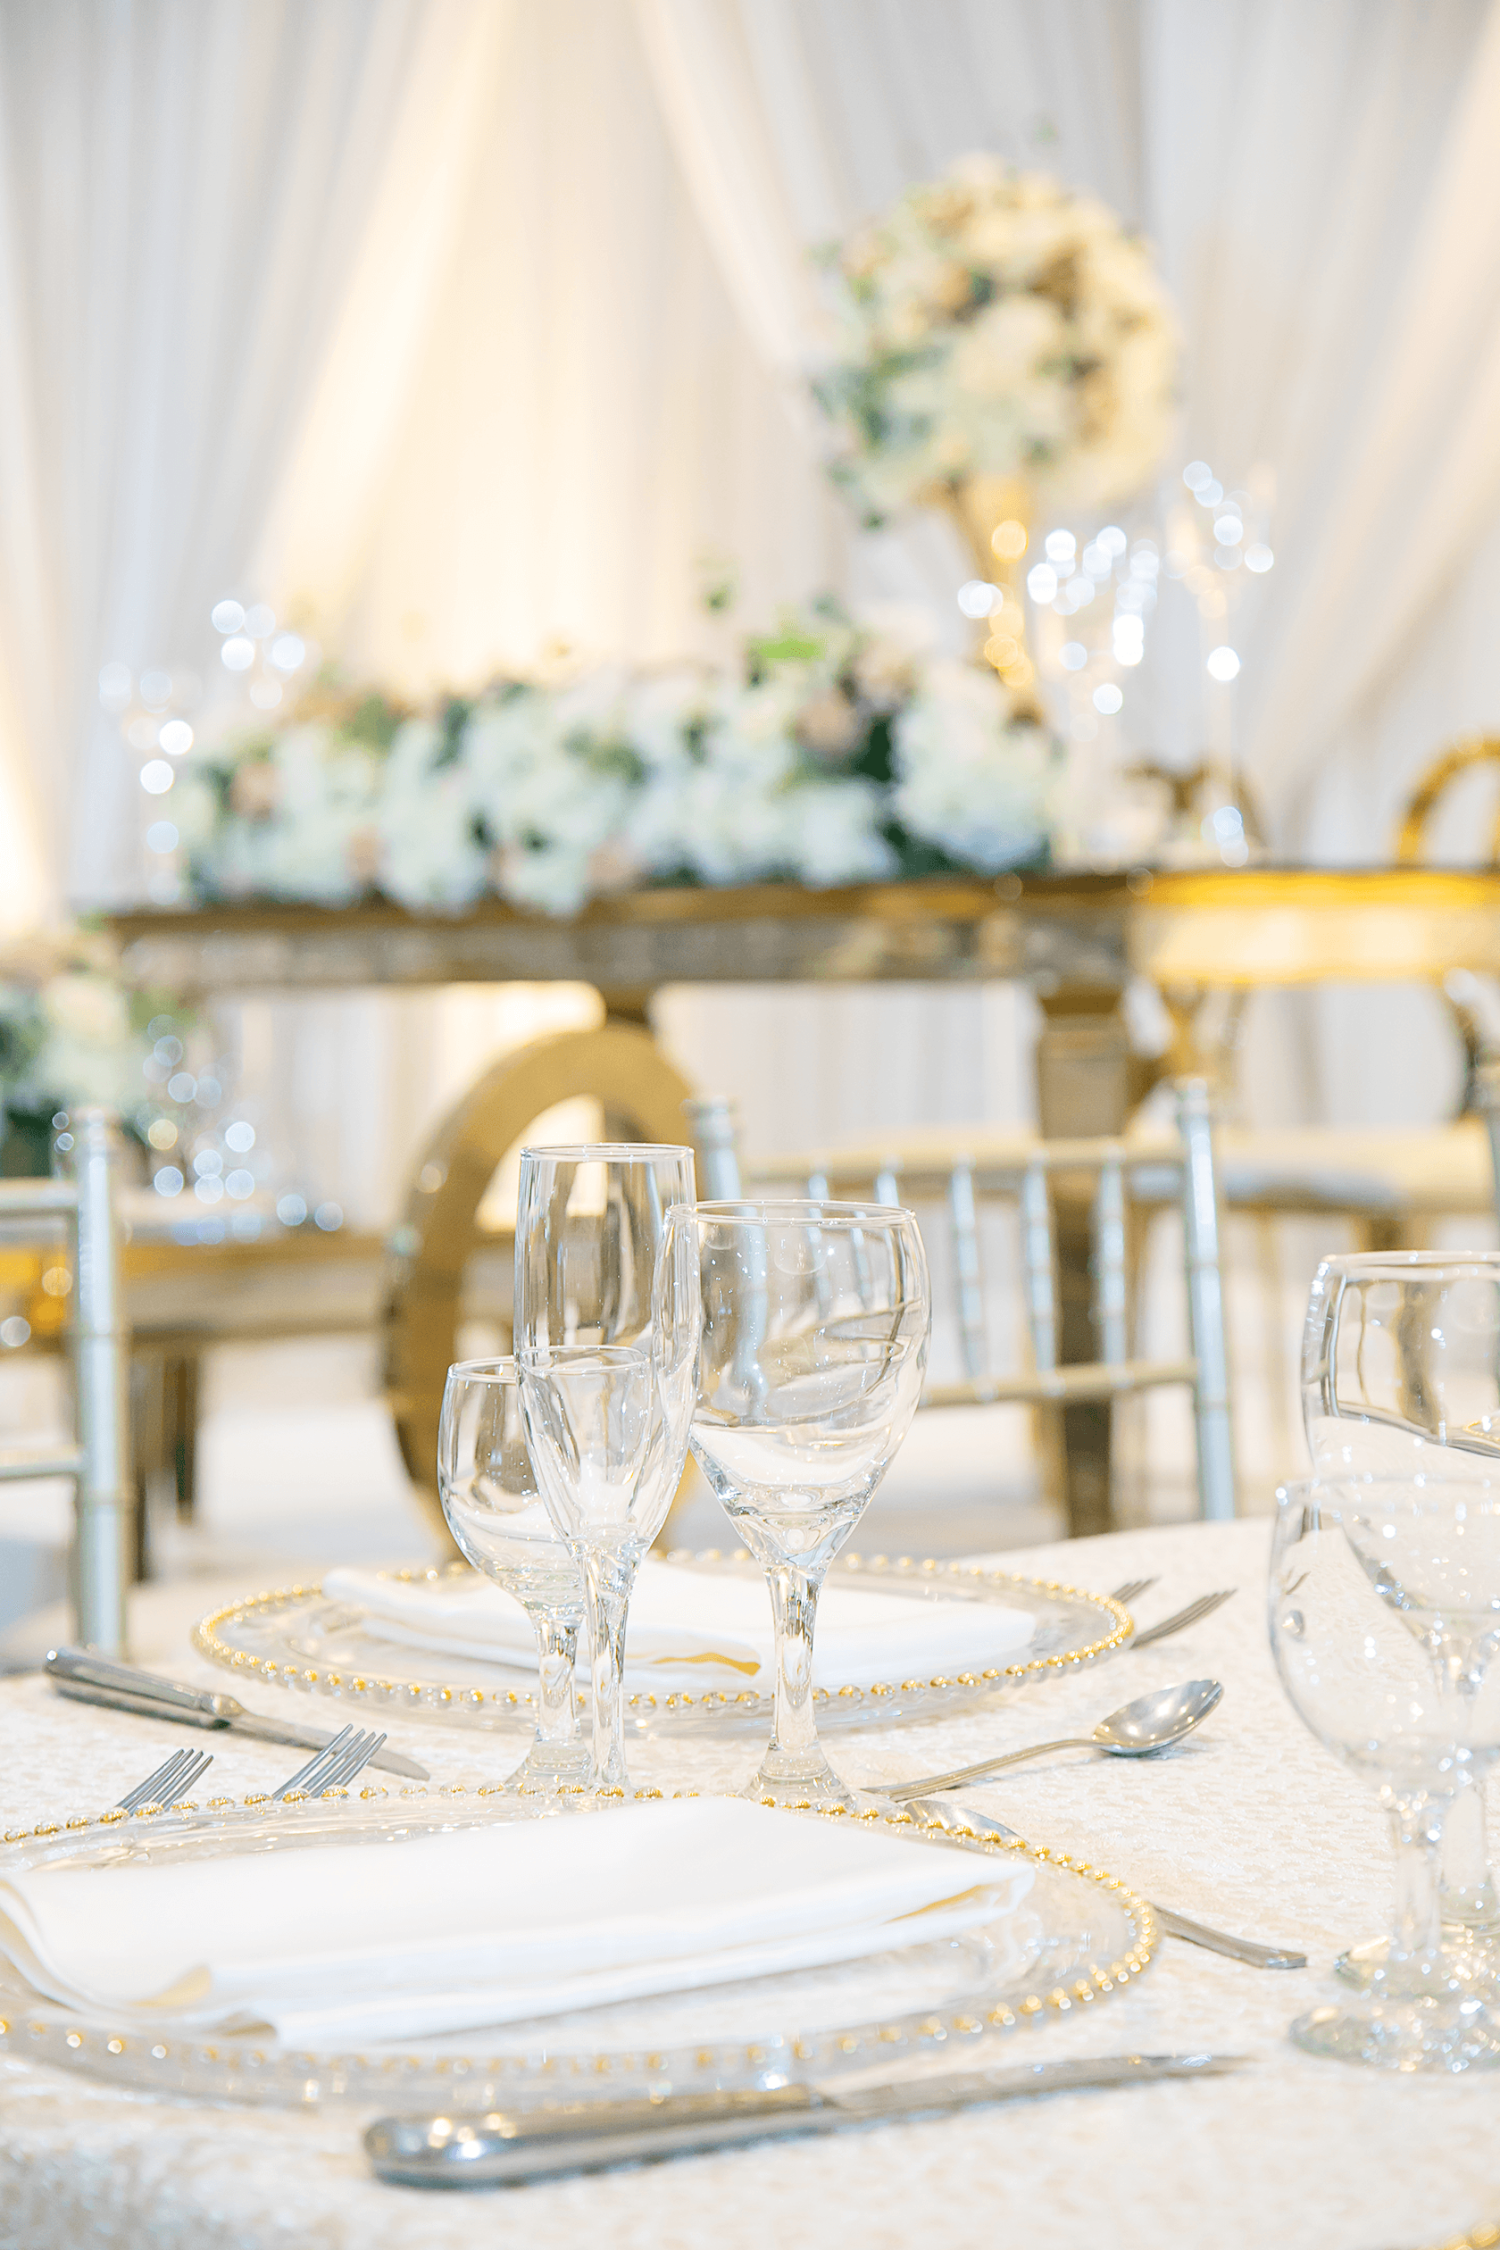 A close up of a table setting at a wedding with white and gold accents at Paradise Banquet Halls.